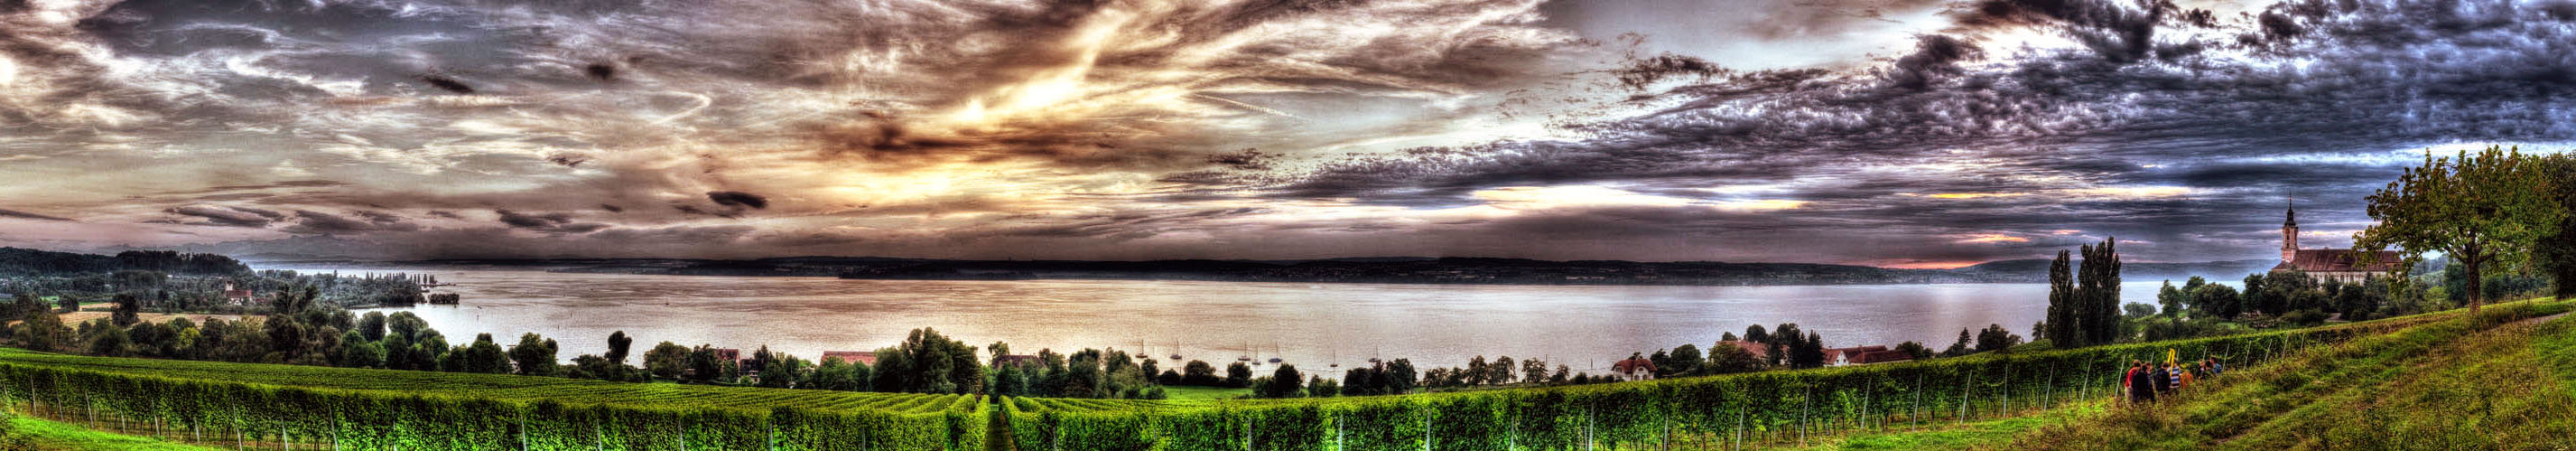 Bodensee Pano